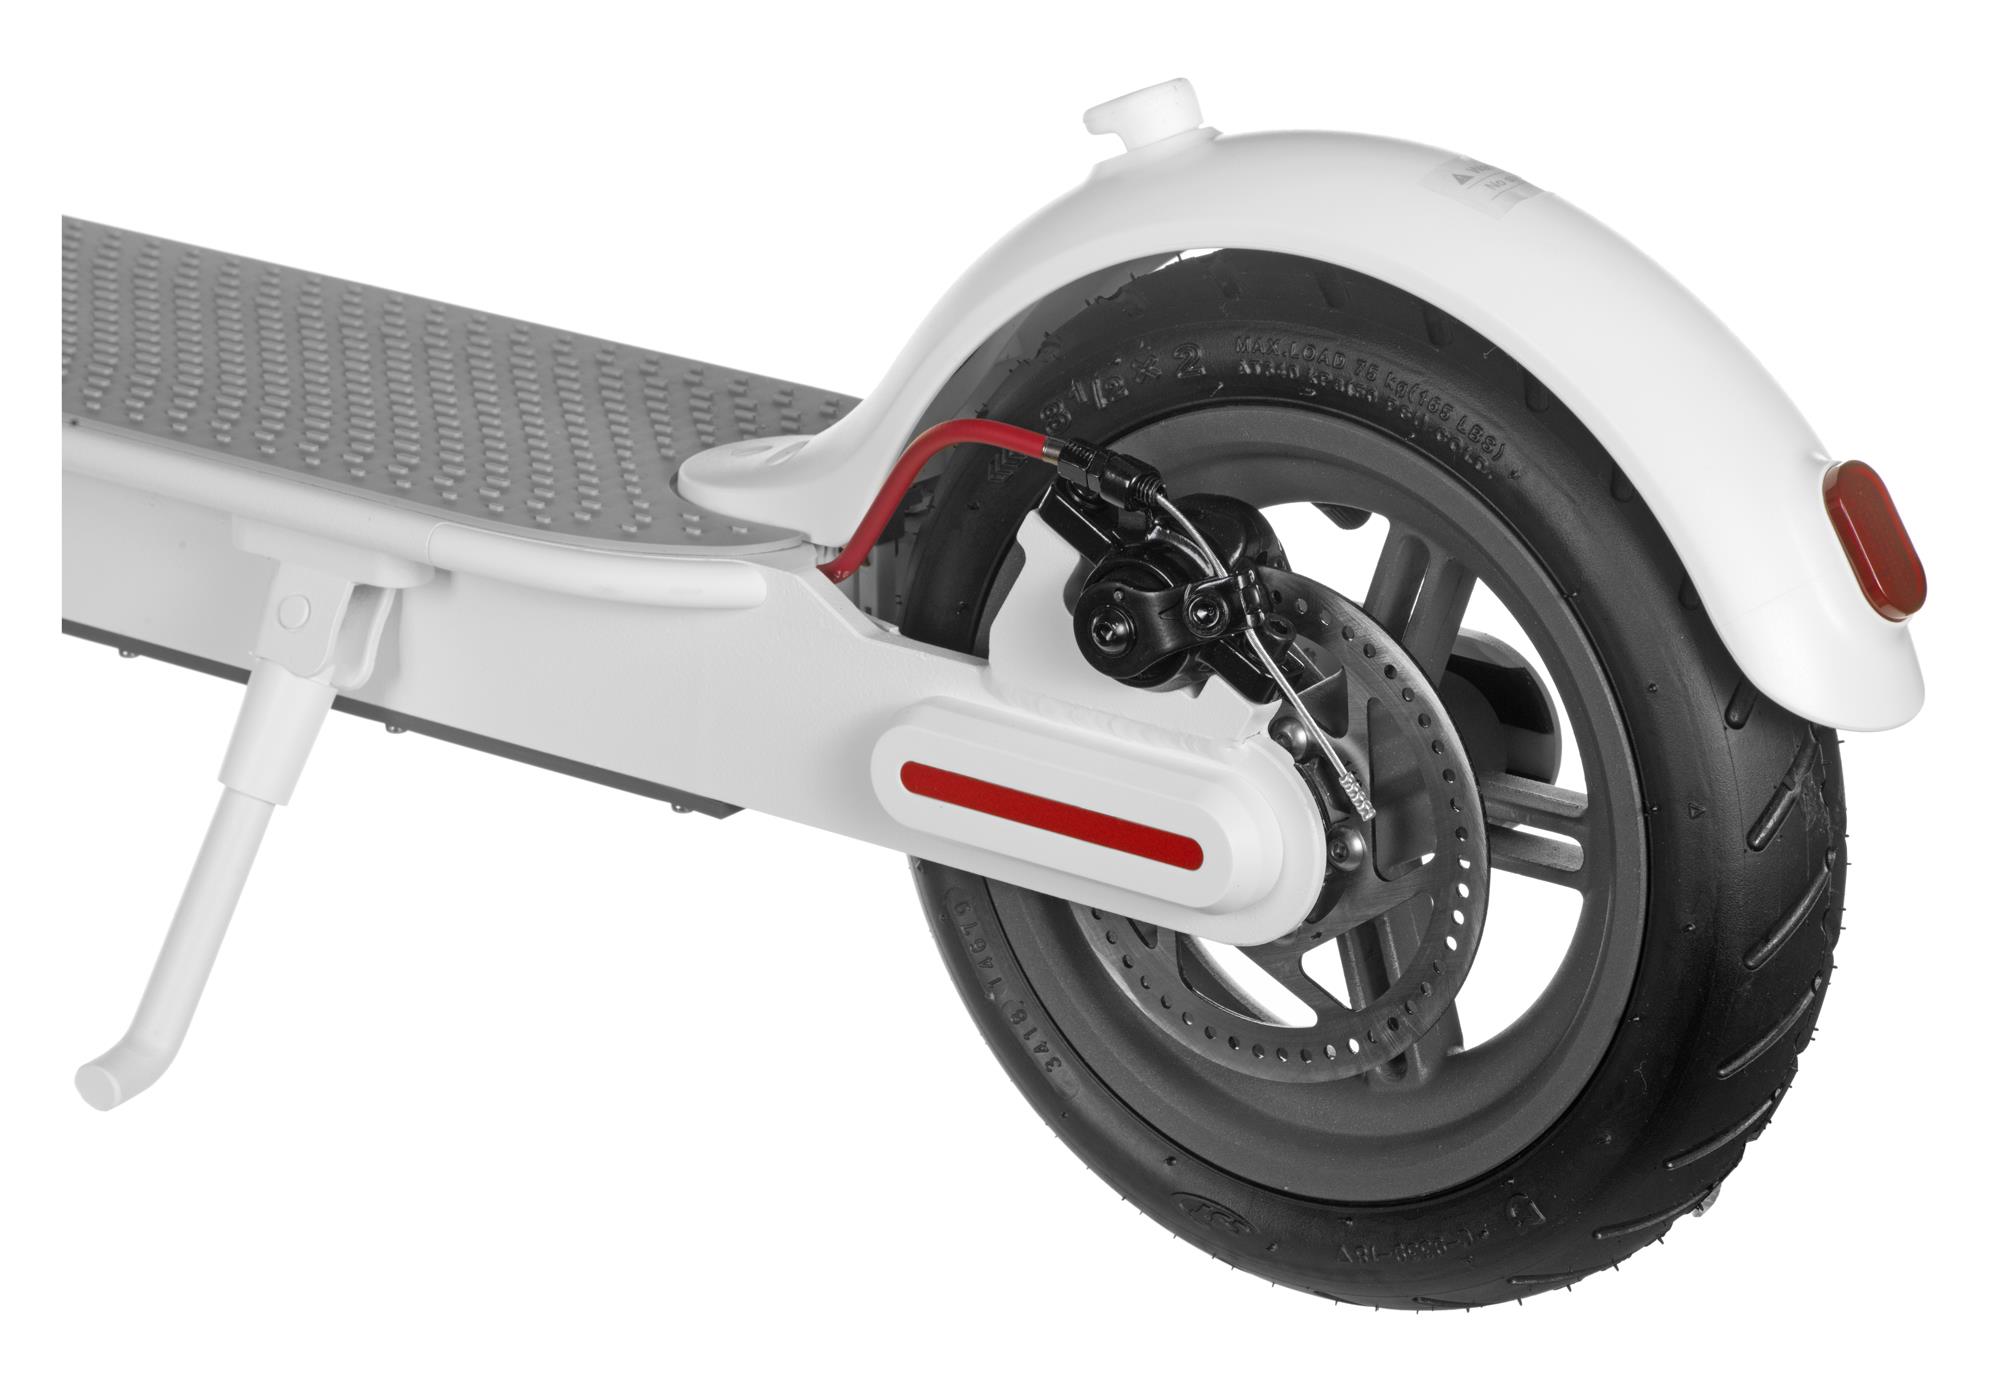 Xiaomi mijia electric scooter 1s. Mi Electric Scooter m365 белый. Электросамокат Xiaomi Mijia Electric Scooter 1s White. Xiaomi mi Electric Scooter fbc4003gl. Xiaomi mija m365 1s белый.